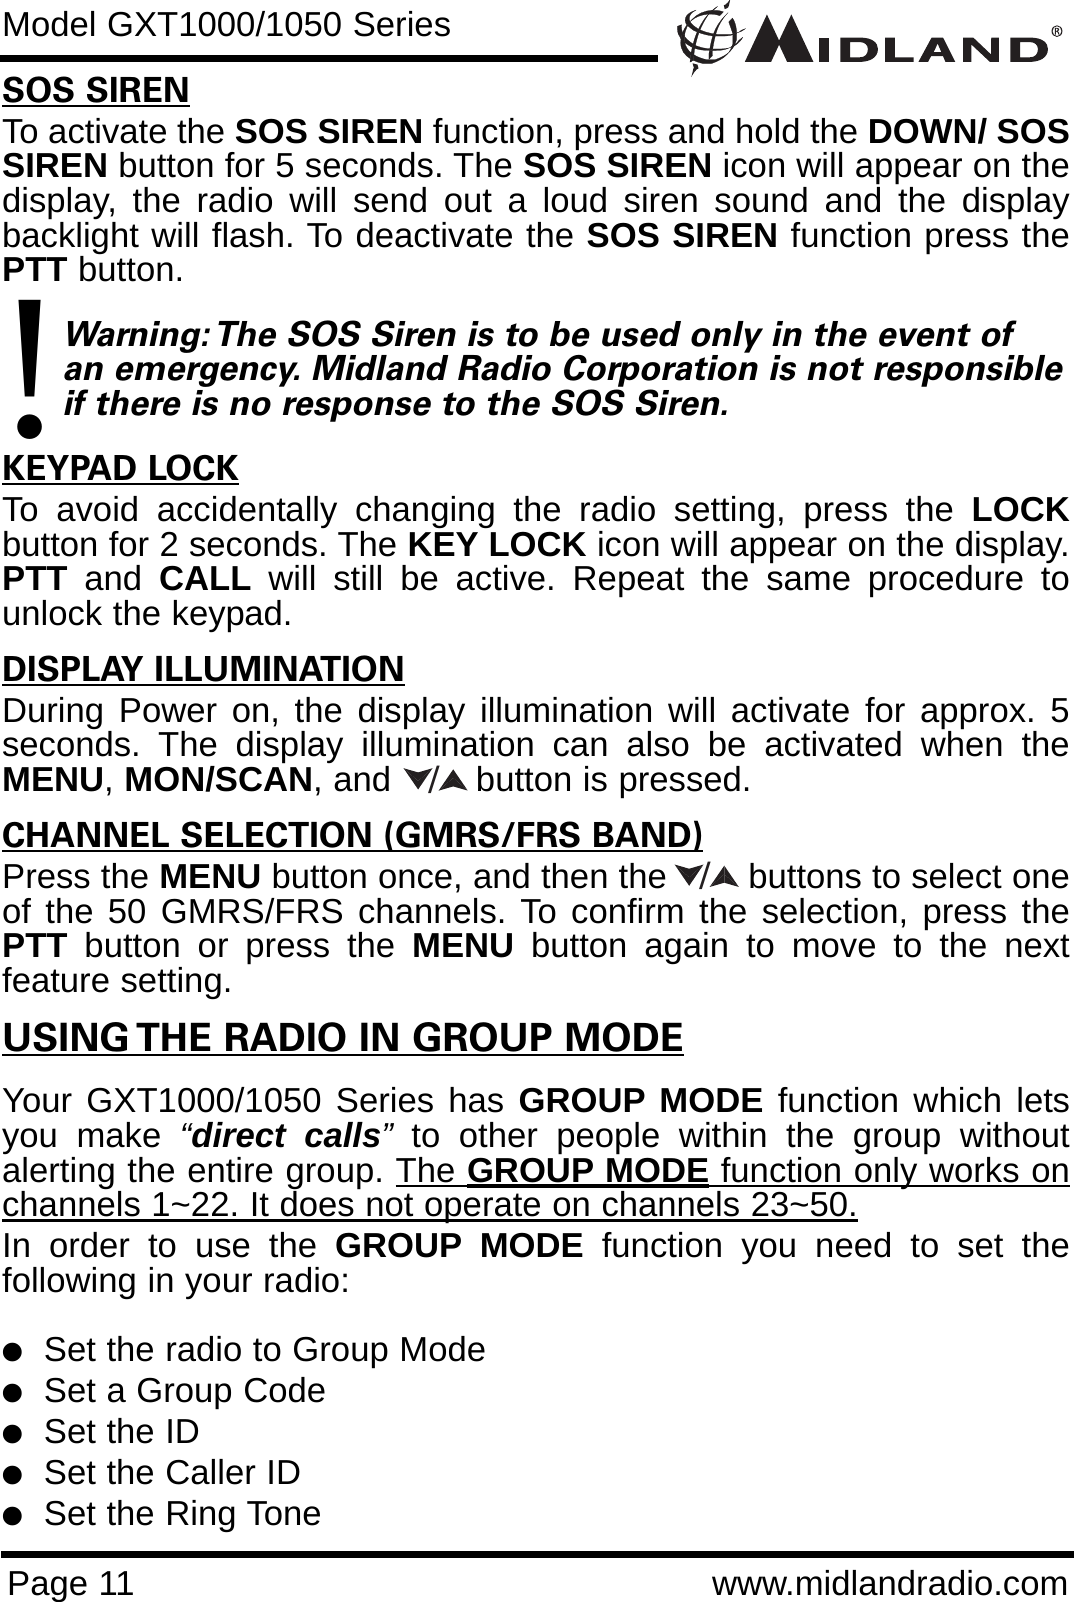 Page 11 www.midlandradio.comSOS SIRENTo activate the SOS SIREN function, press and hold the DOWN/ SOSSIREN button for 5 seconds. The SOS SIREN icon will appear on thedisplay, the radio will send out a loud siren sound and the displaybacklight will flash. To deactivate the SOS SIREN function press thePTT button.    Warning: The SOS Siren is to be used only in the event of an emergency. Midland Radio Corporation is not responsibleif there is no response to the SOS Siren.KEYPAD LOCKTo avoid accidentally changing the radio setting, press the LOCKbutton for 2 seconds. The KEY LOCK icon will appear on the display.PTT and  CALL will still be active. Repeat the same procedure tounlock the keypad.                                                                           DISPLAY ILLUMINATIONDuring Power on, the display illumination will activate for approx. 5seconds. The display illumination can also be activated when theMENU,MON/SCAN, and button is pressed.CHANNEL SELECTION (GMRS/FRS BAND)Press the MENU button once, and then the        buttons to select oneof the 50 GMRS/FRS channels. To confirm the selection, press thePTT button or press the MENU button again to move to the nextfeature setting.USING THE RADIO IN GROUP MODEYour GXT1000/1050 Series has GROUP MODE function which letsyou make “direct calls”to other people within the group withoutalerting the entire group. The GROUP MODE function only works onchannels 1~22. It does not operate on channels 23~50.In order to use the GROUP MODE function you need to set thefollowing in your radio:lSet the radio to Group ModelSet a Group CodelSet the IDlSet the Caller IDlSet the Ring Tone/Model GXT1000/1050 Series/!